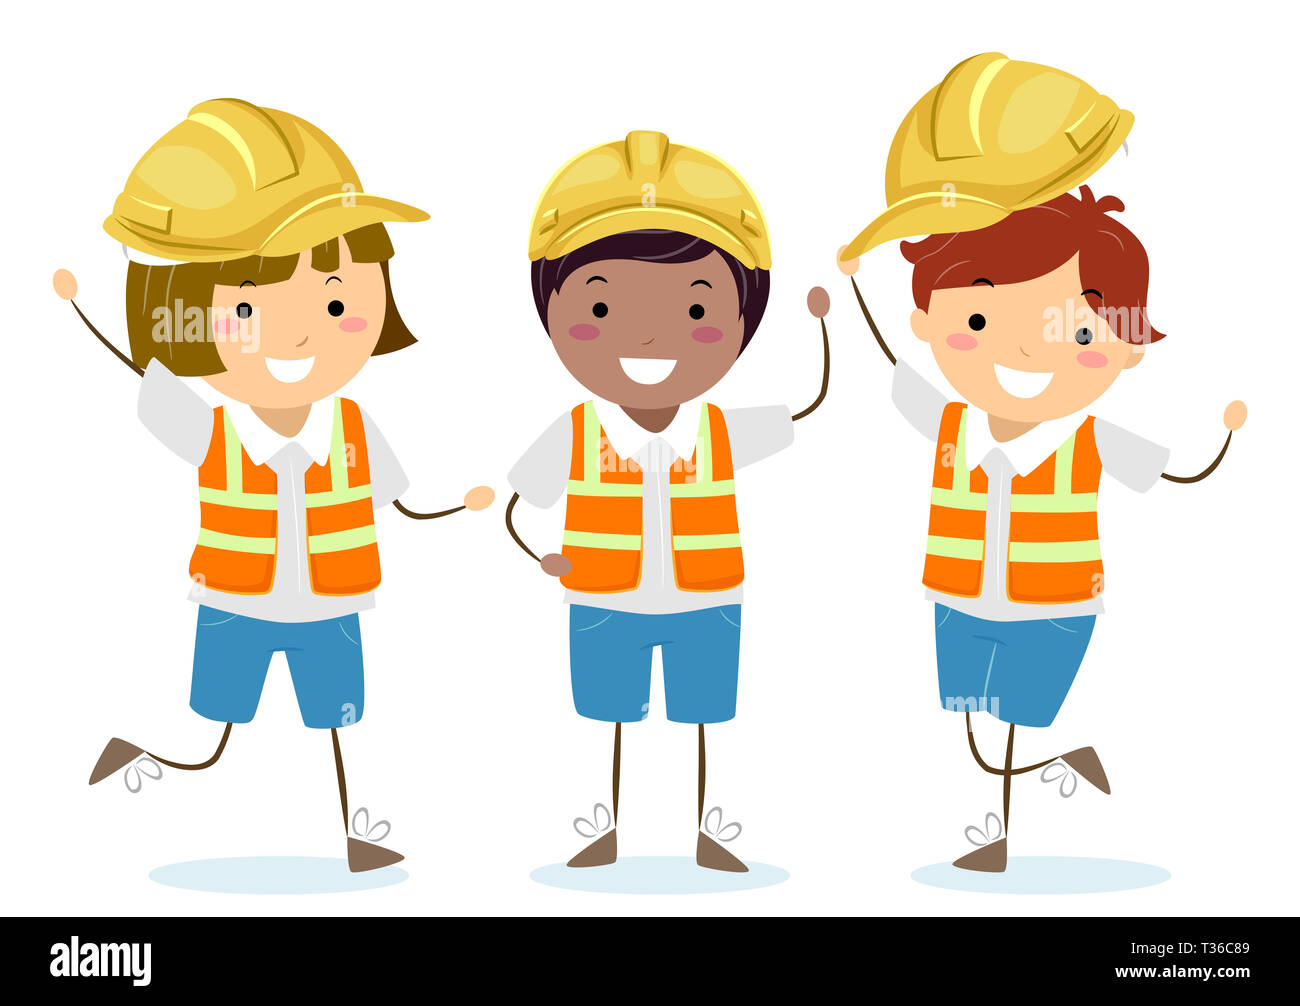 Illustration of Stickman Kids Wearing Yellow Construction Hard Hats and Reflector or Safety Vest Stock Photo